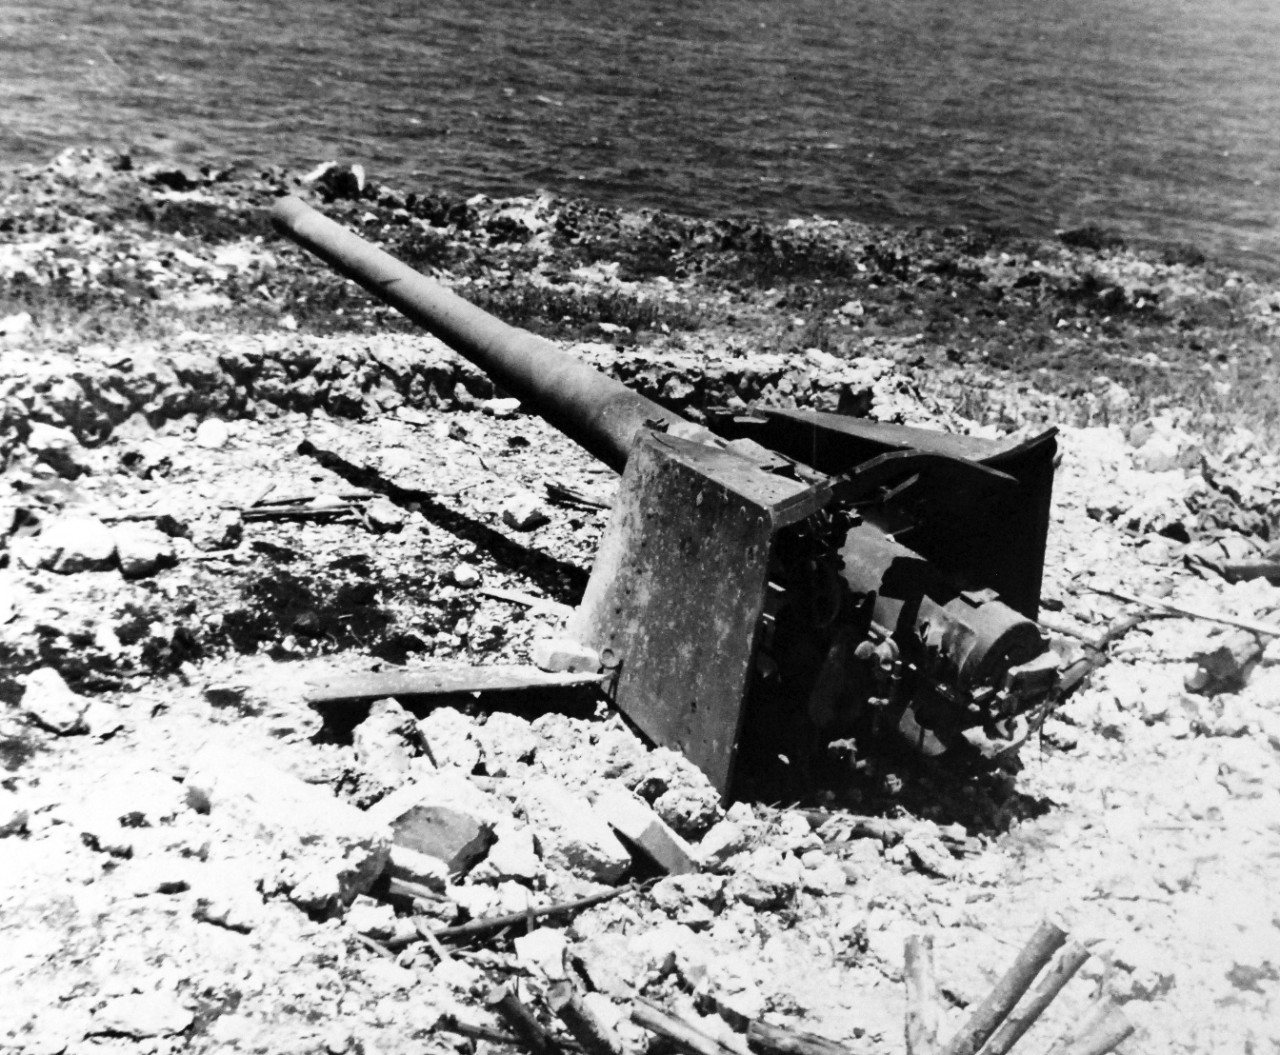 80-G-287162:   Invasion of Saipan, June-July 1944.     Enemy guns found on Saipan after its occupation by American forces, Nafutan Point, 6” gun, July 2, 1944.     Photographed by USS Indianapolis (CA 35) photographer.   Official U.S. Navy photograph, now in the collections of the National Archives.  (2017/03/21).  